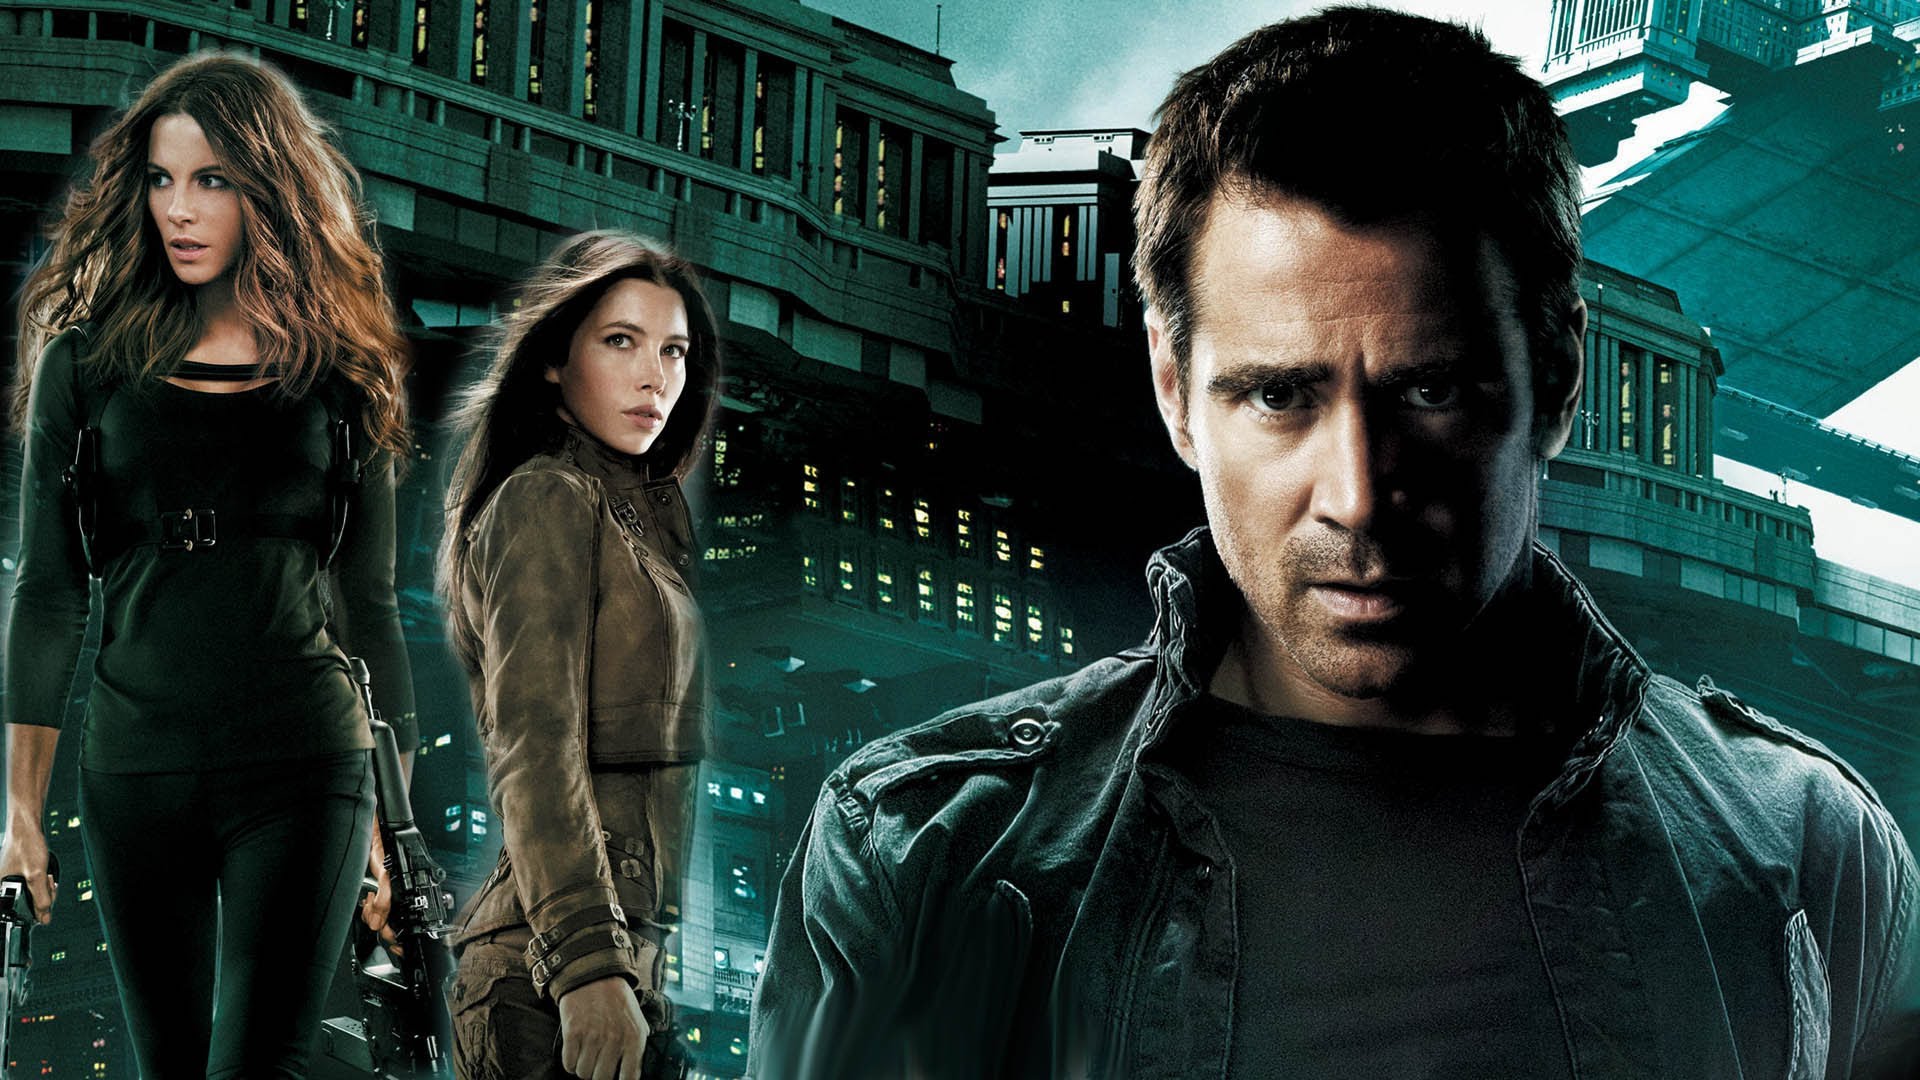 Total Recall (2012) Theatrical VS. Director's Cut - The Action Elite